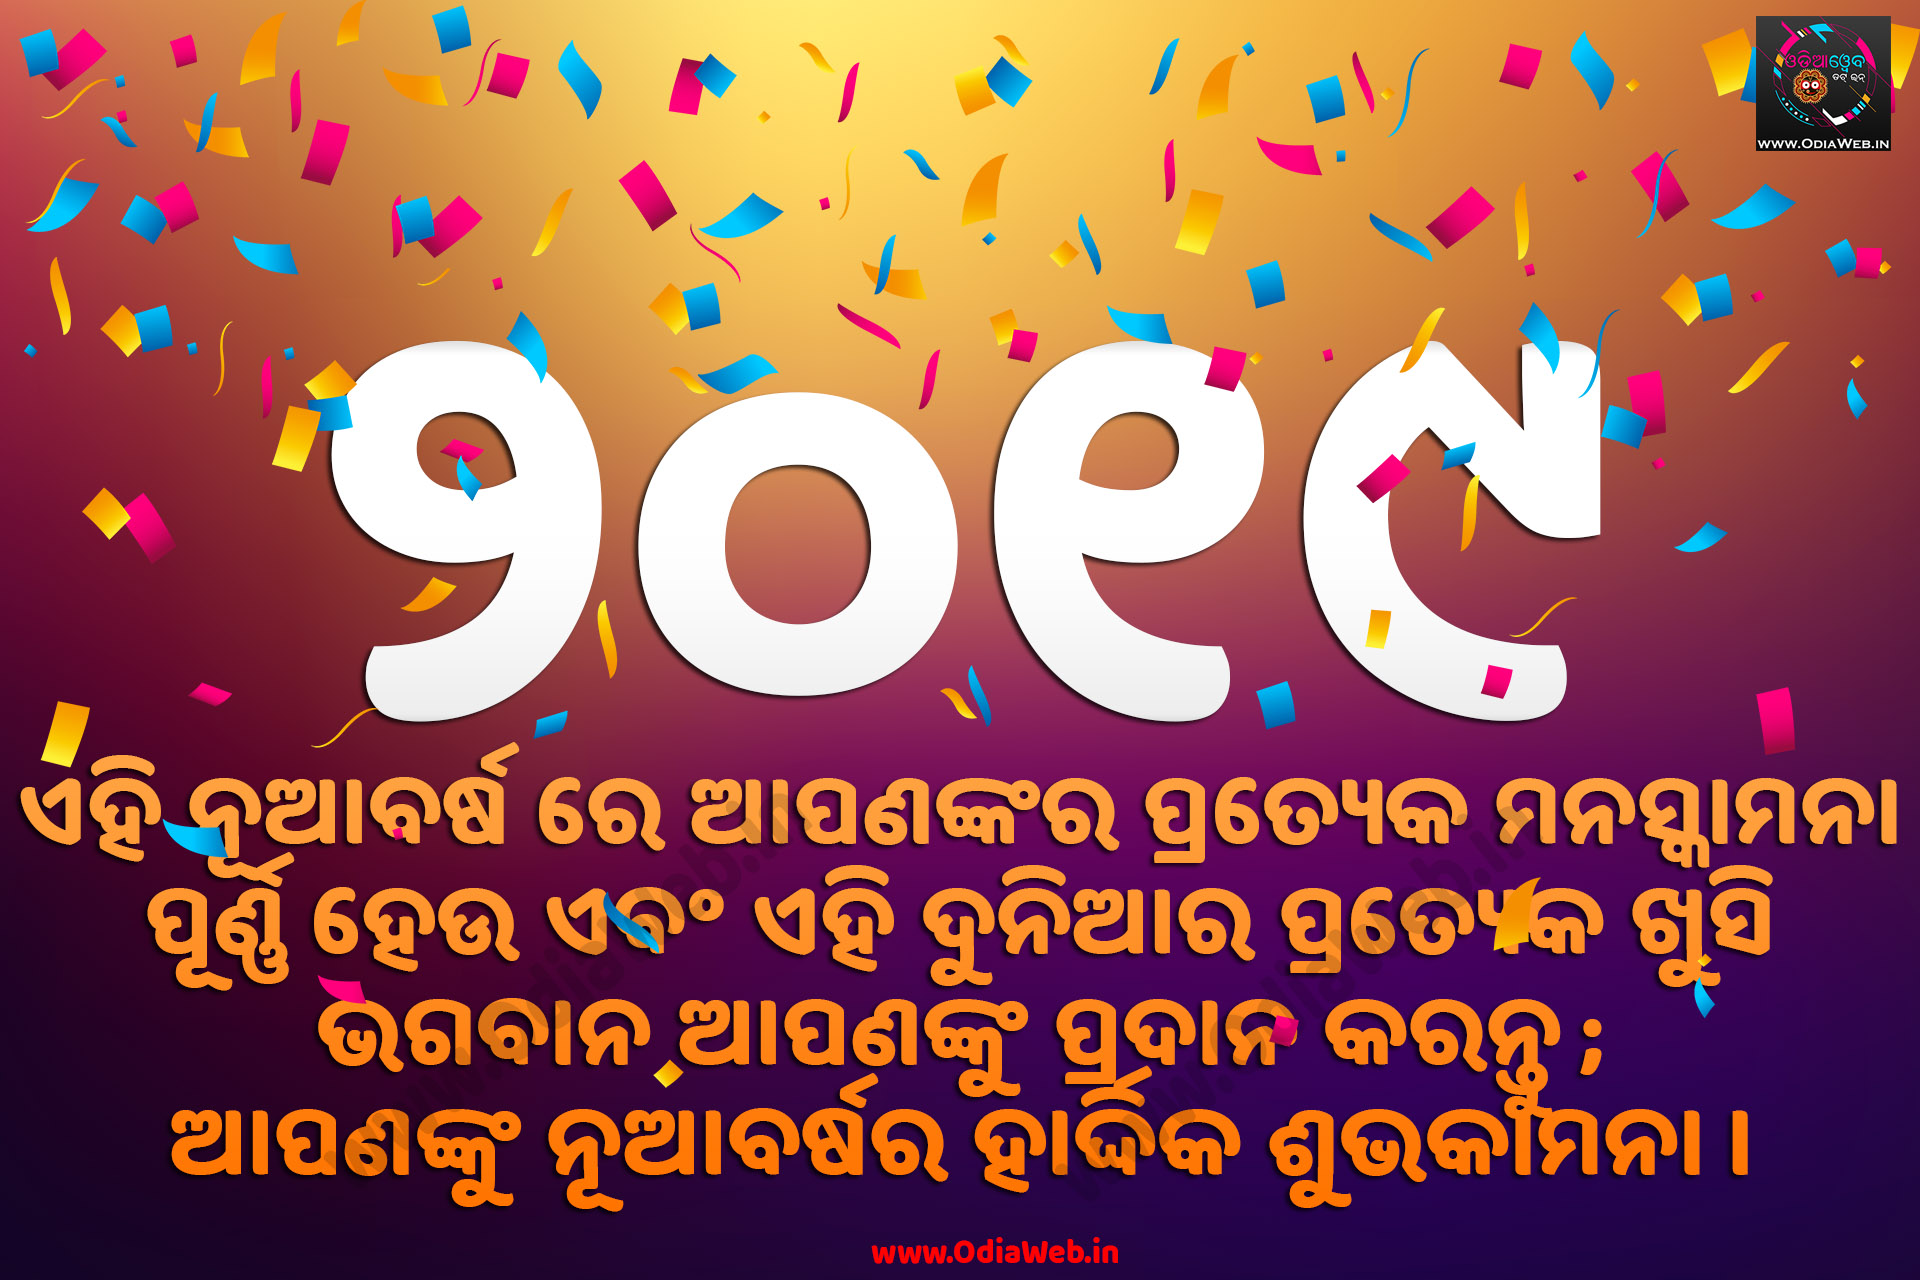 Happy New Year Wallpaper In Odia Language - Happy New Year 2019 Odia , HD Wallpaper & Backgrounds